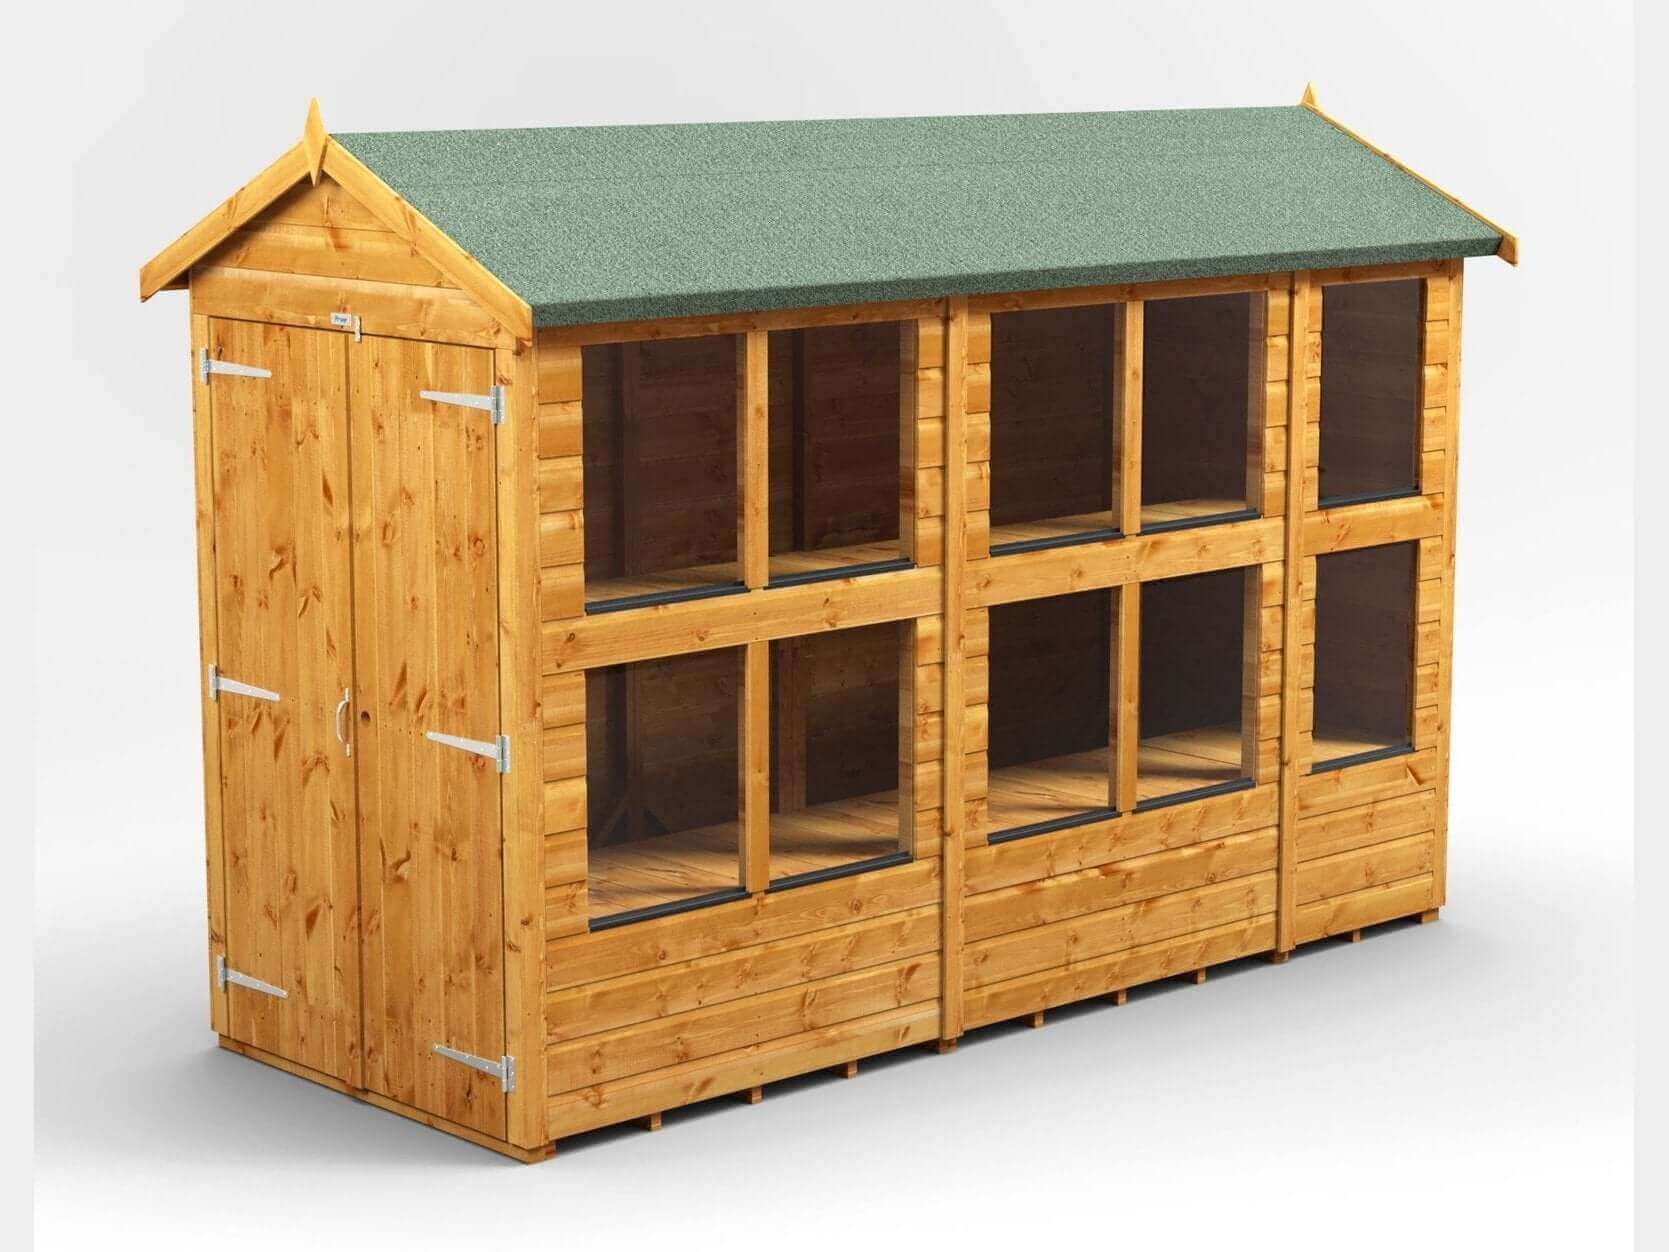 Power Apex Wooden Potting Shed Various Sizes Shed Sizes: Power Apex Potting Shed 10x4